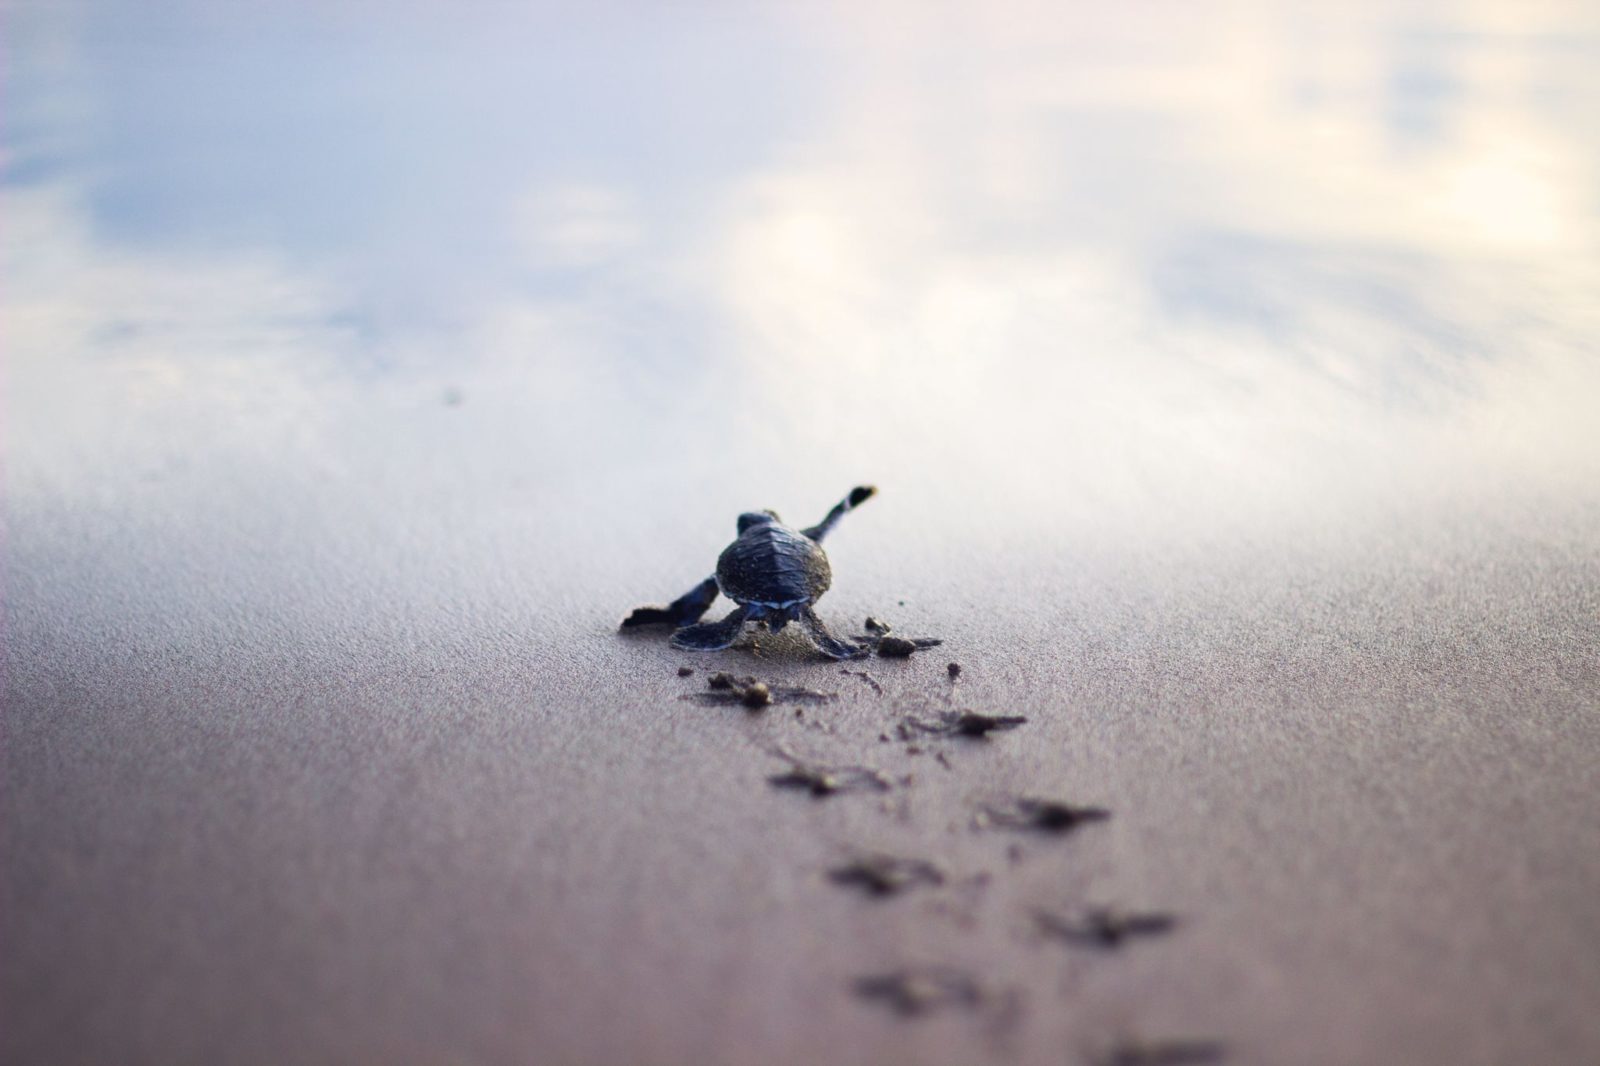 my-girlfriend-took-this-picture-of-a-baby-turtle-desperately-running-to-the-sea-shore-imgur-1600x1066